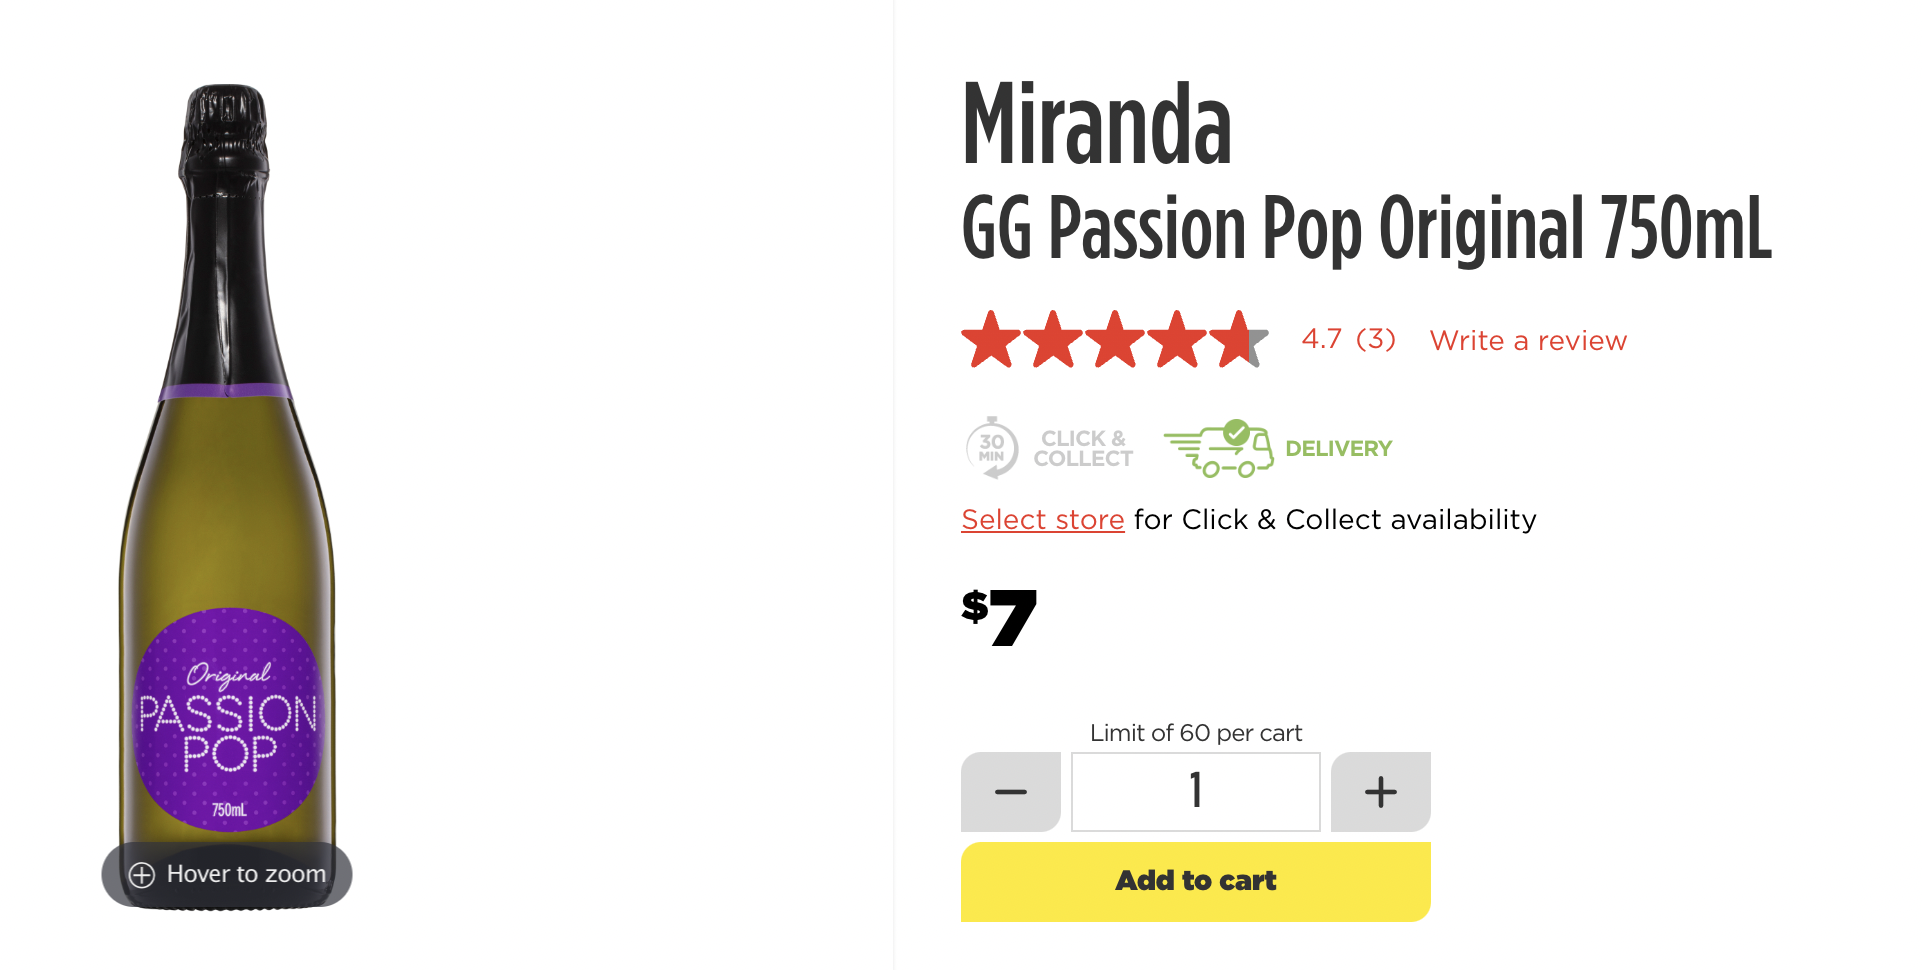 A screenshot of Passion Pop being sold for $7